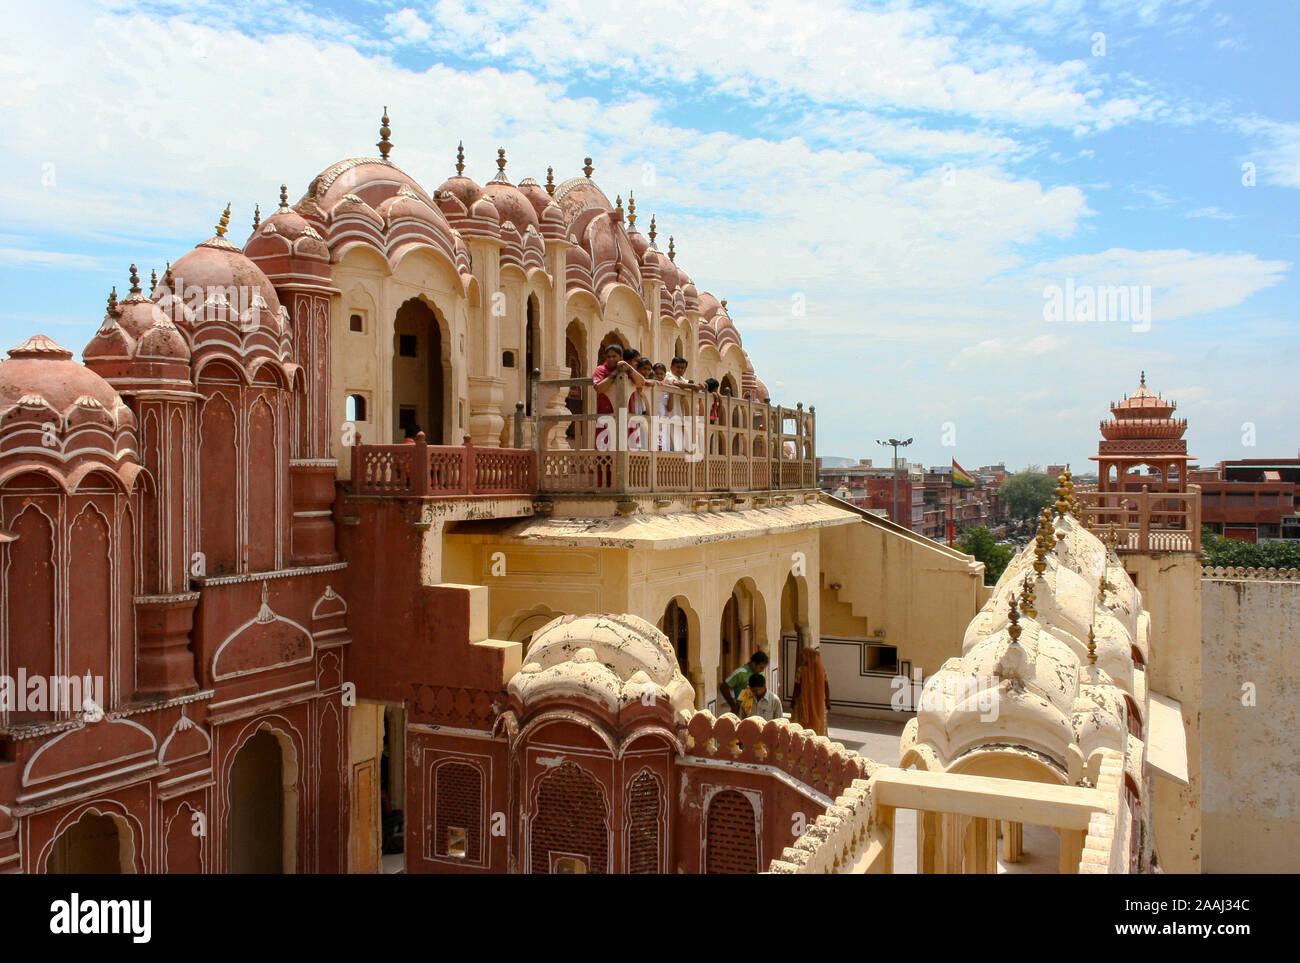 Jaipur, Rajasthan, India: internal facade of the palace of winds (Hawa Mahal) with some people facing the terrace Stock Photo